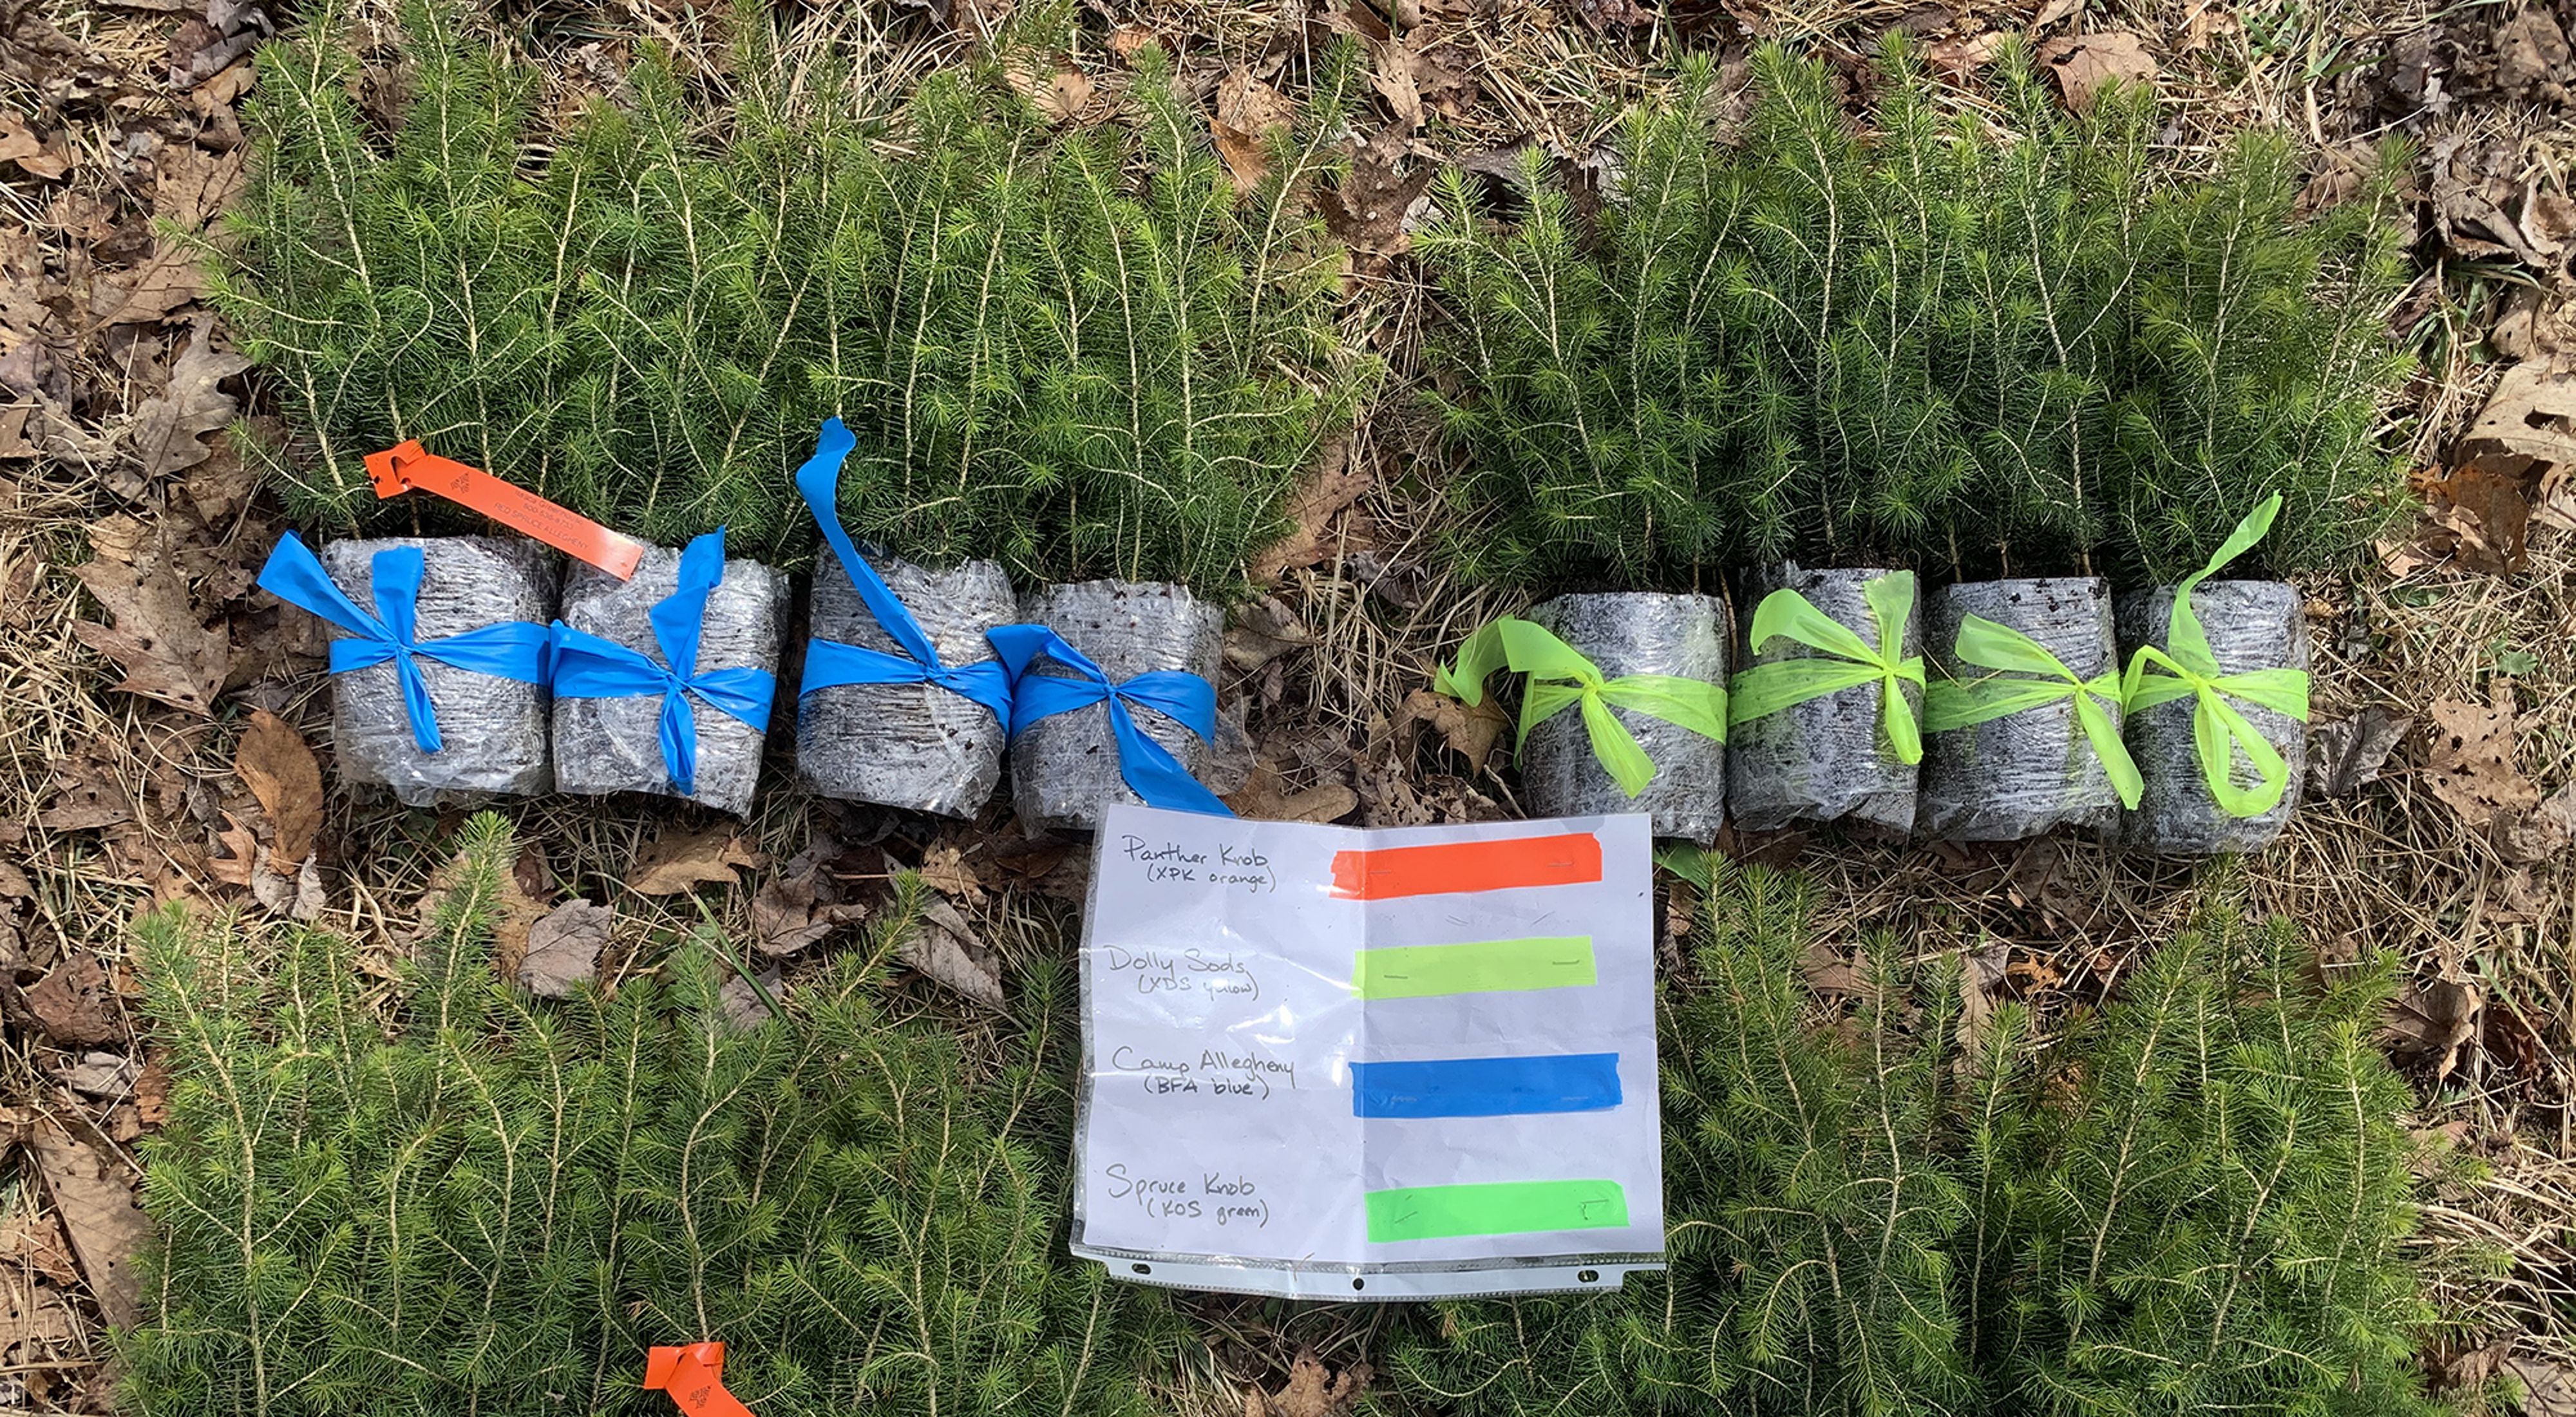 Red spruce seedlings lay on the ground grouped in color coded bundles. A paper chart in the middle of the group identifies the genetic strains of each group.